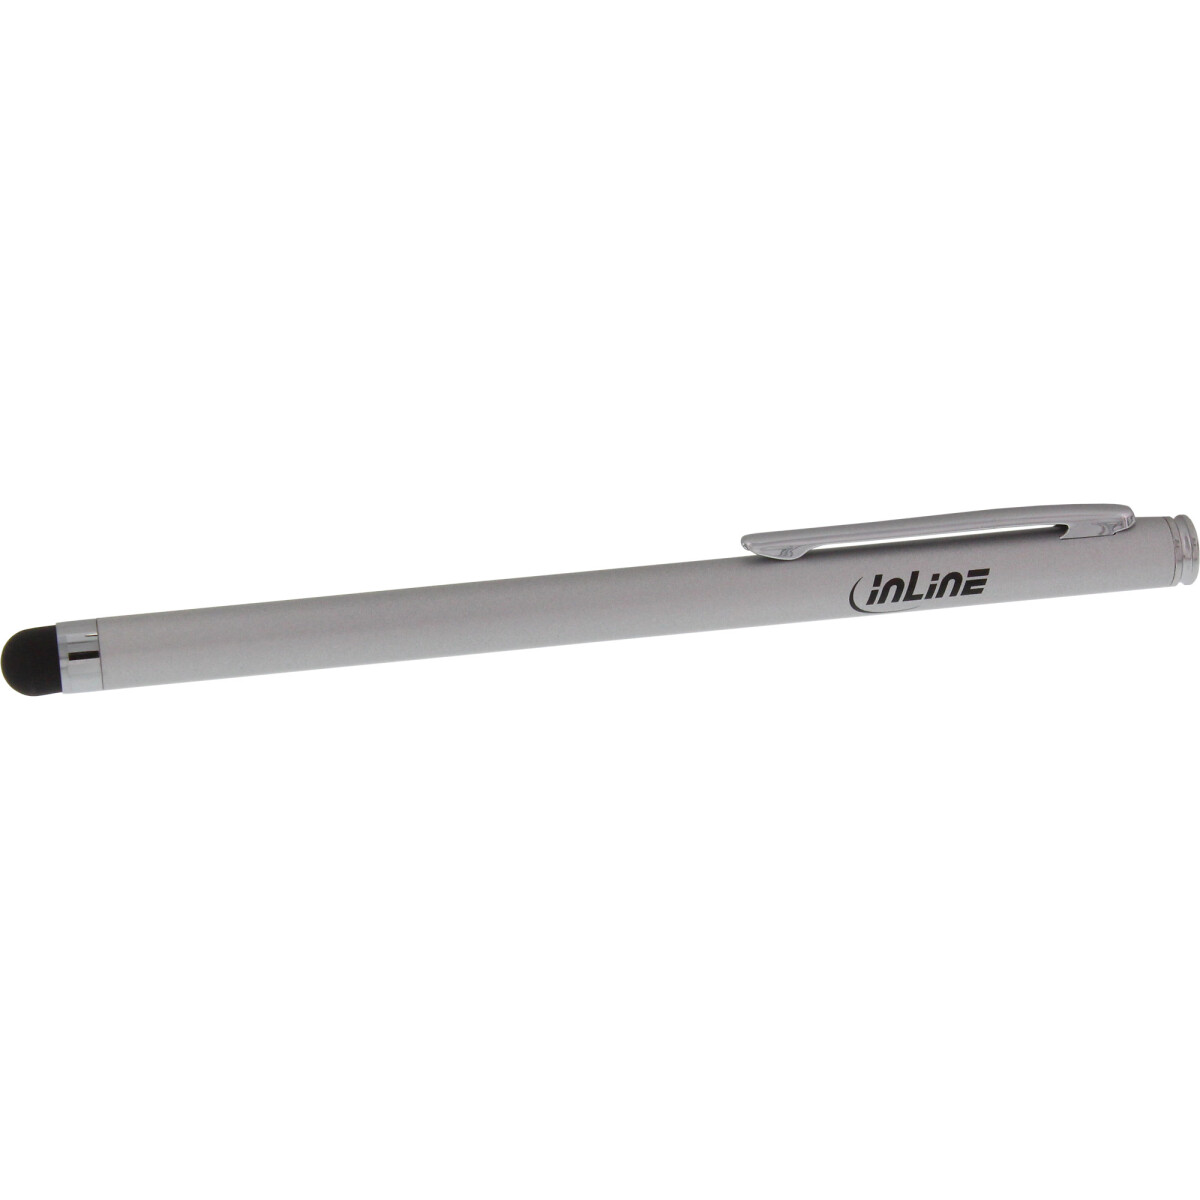 InLine® Stylus, Pen for Touchscreens of Smartphone...